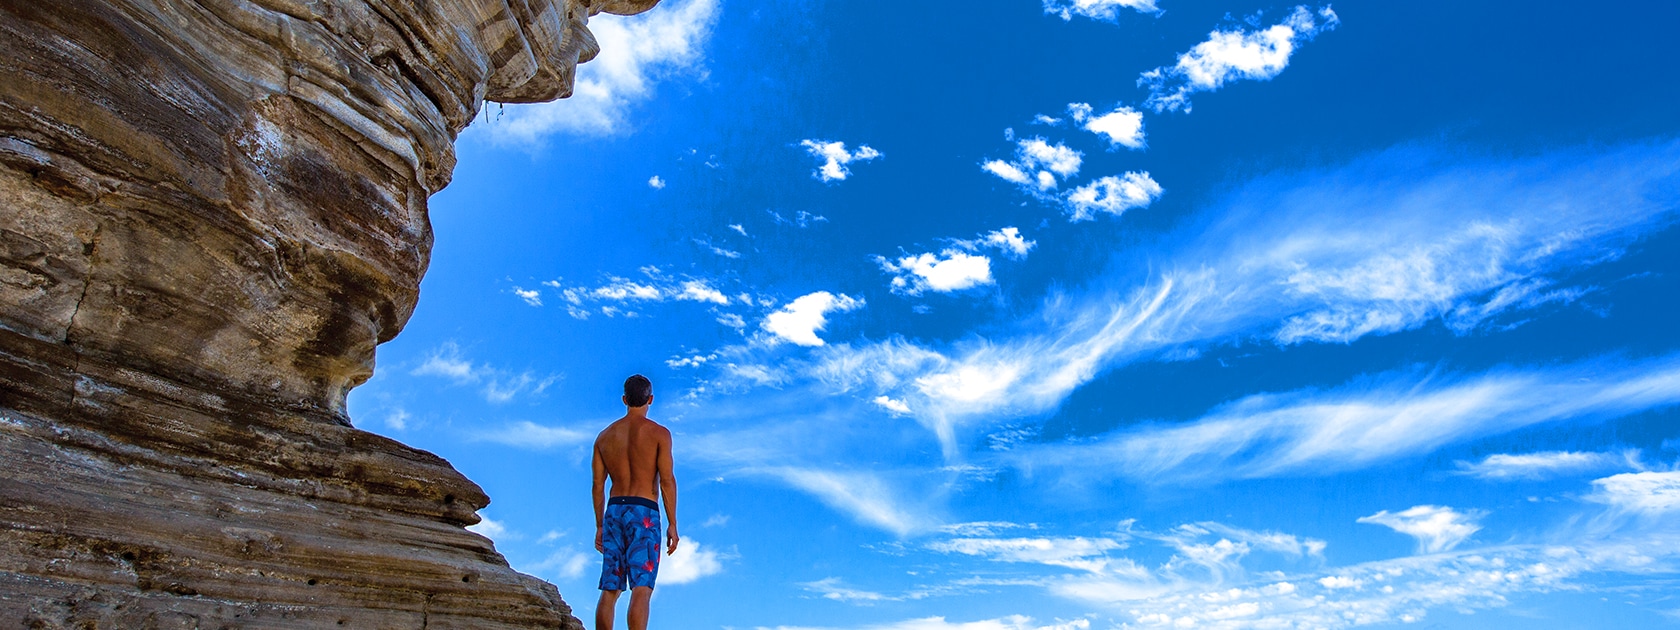 Man standing on side of cliff